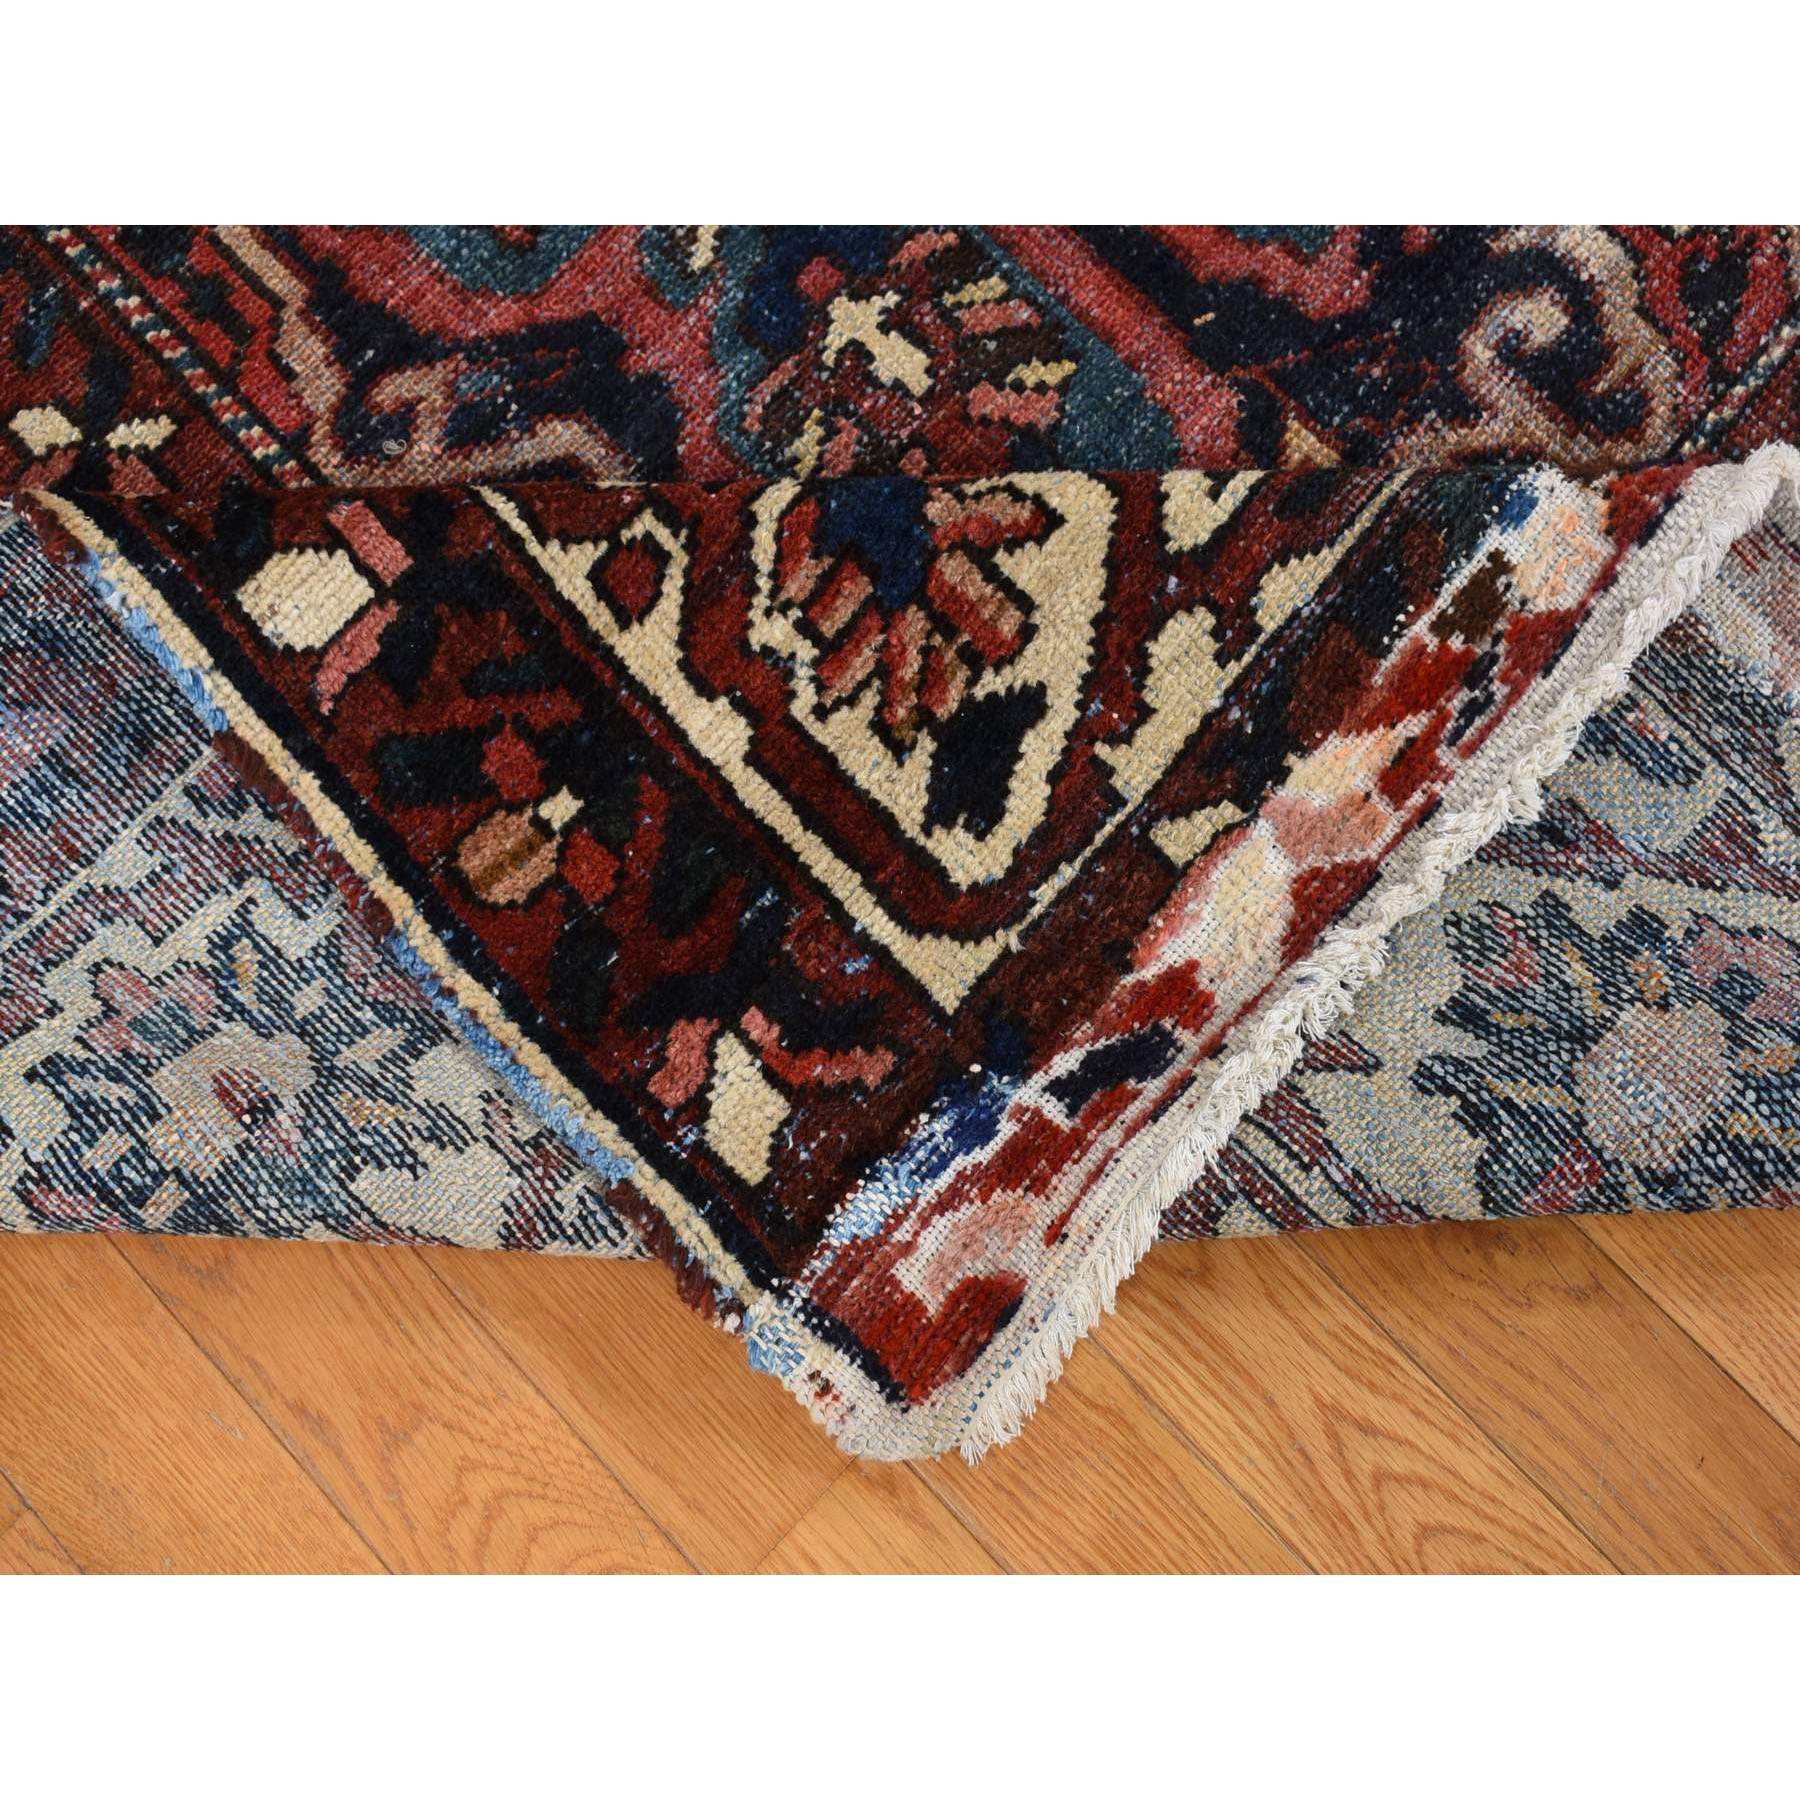 10'x13'2" Chocolate Brown, Antique Persian Bakhtiar, Extensive Wear, Cropped Thin, Pure Wool Hand Woven, Clean Sides And Ends Professionally Secured, Oriental Rug 